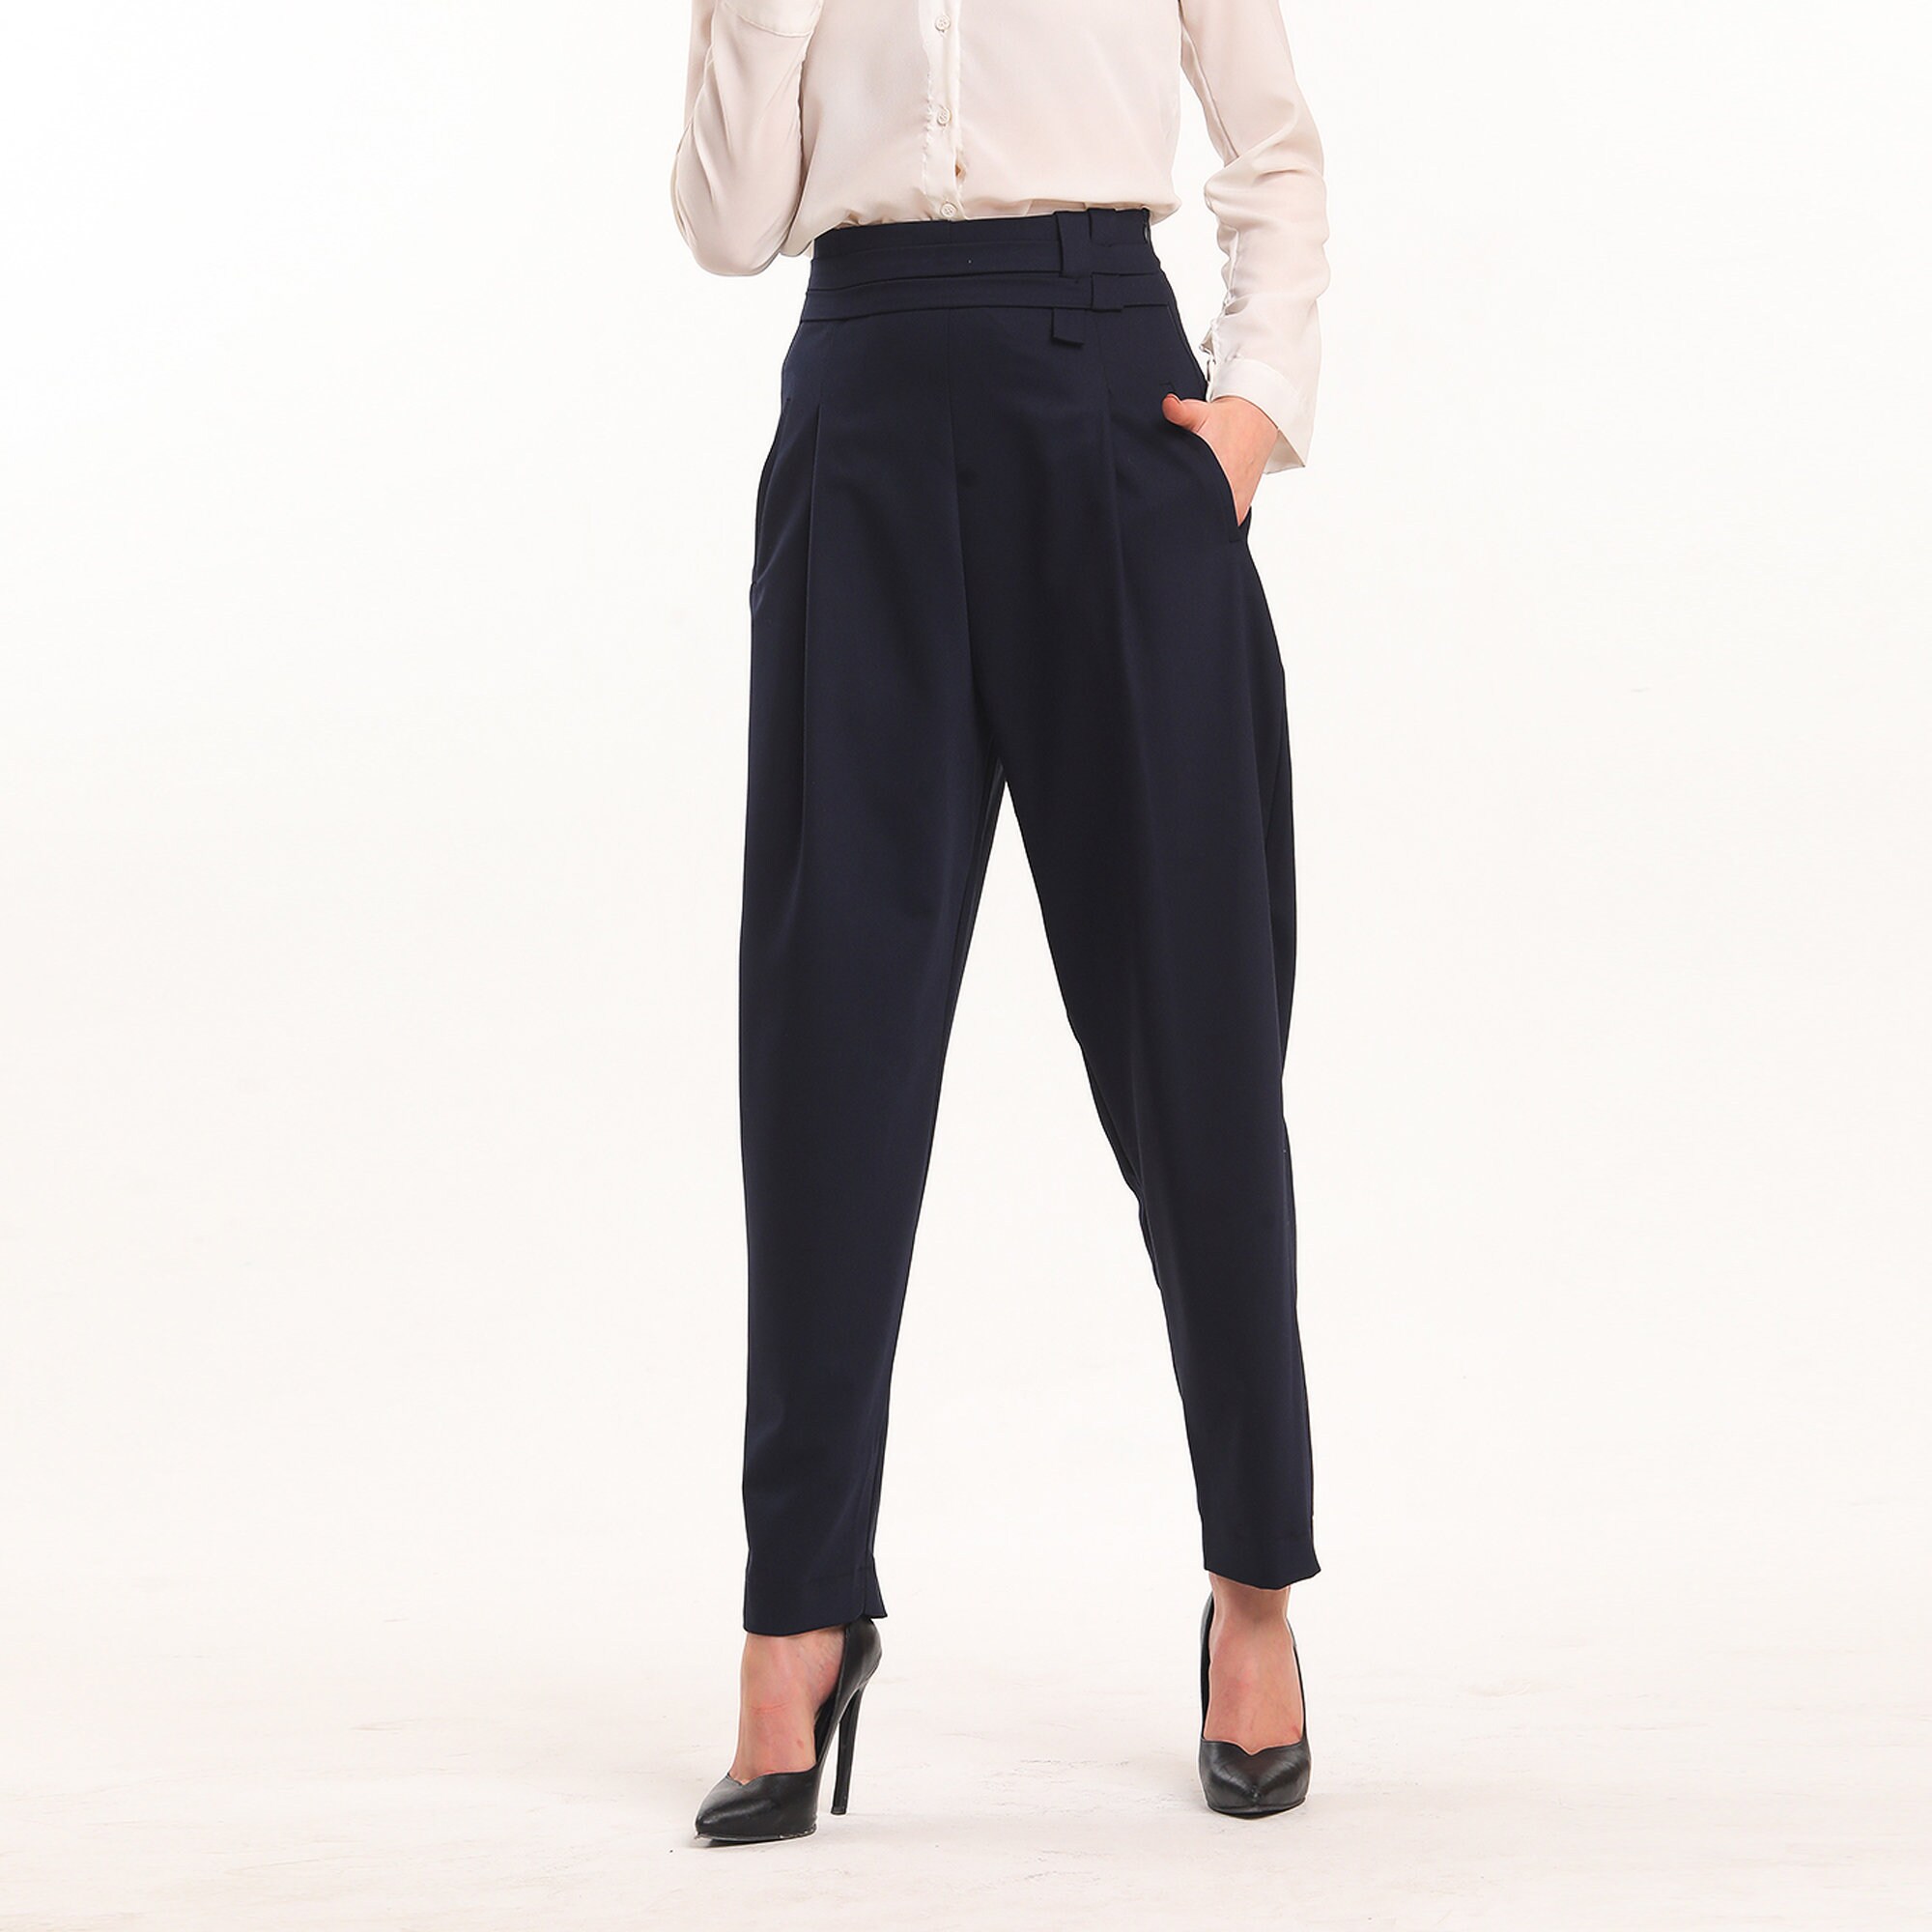 Women's Work Pants, Tailored, High-Waisted & More